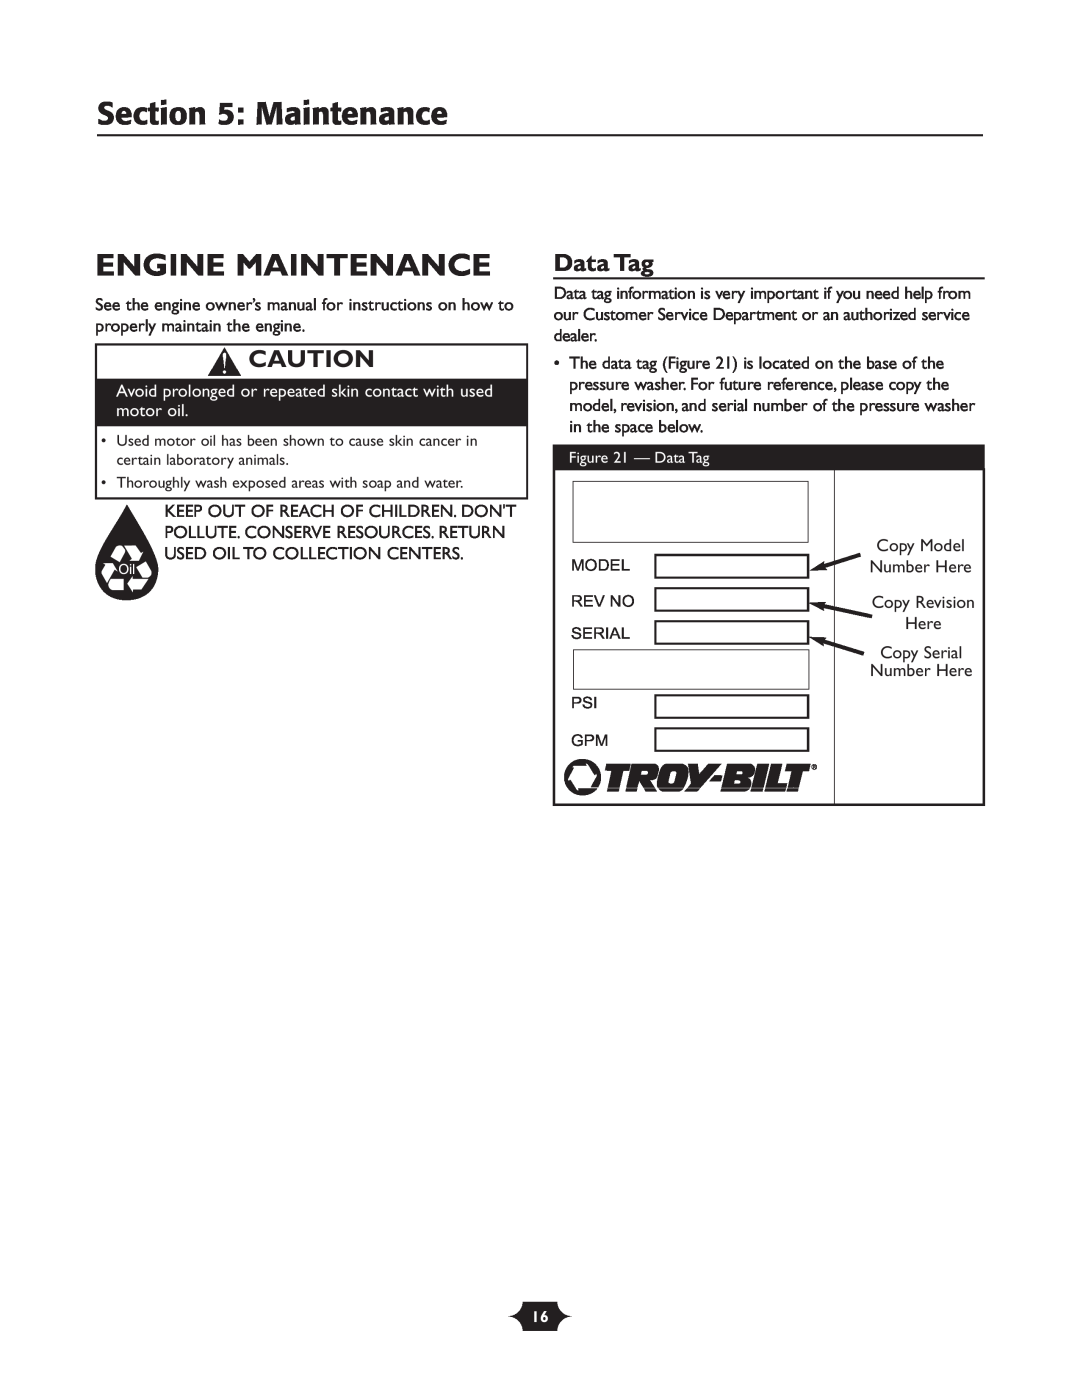 Troy-Bilt 020242-1 owner manual Engine Maintenance, Data Tag, Avoid prolonged or repeated skin contact with used motor oil 